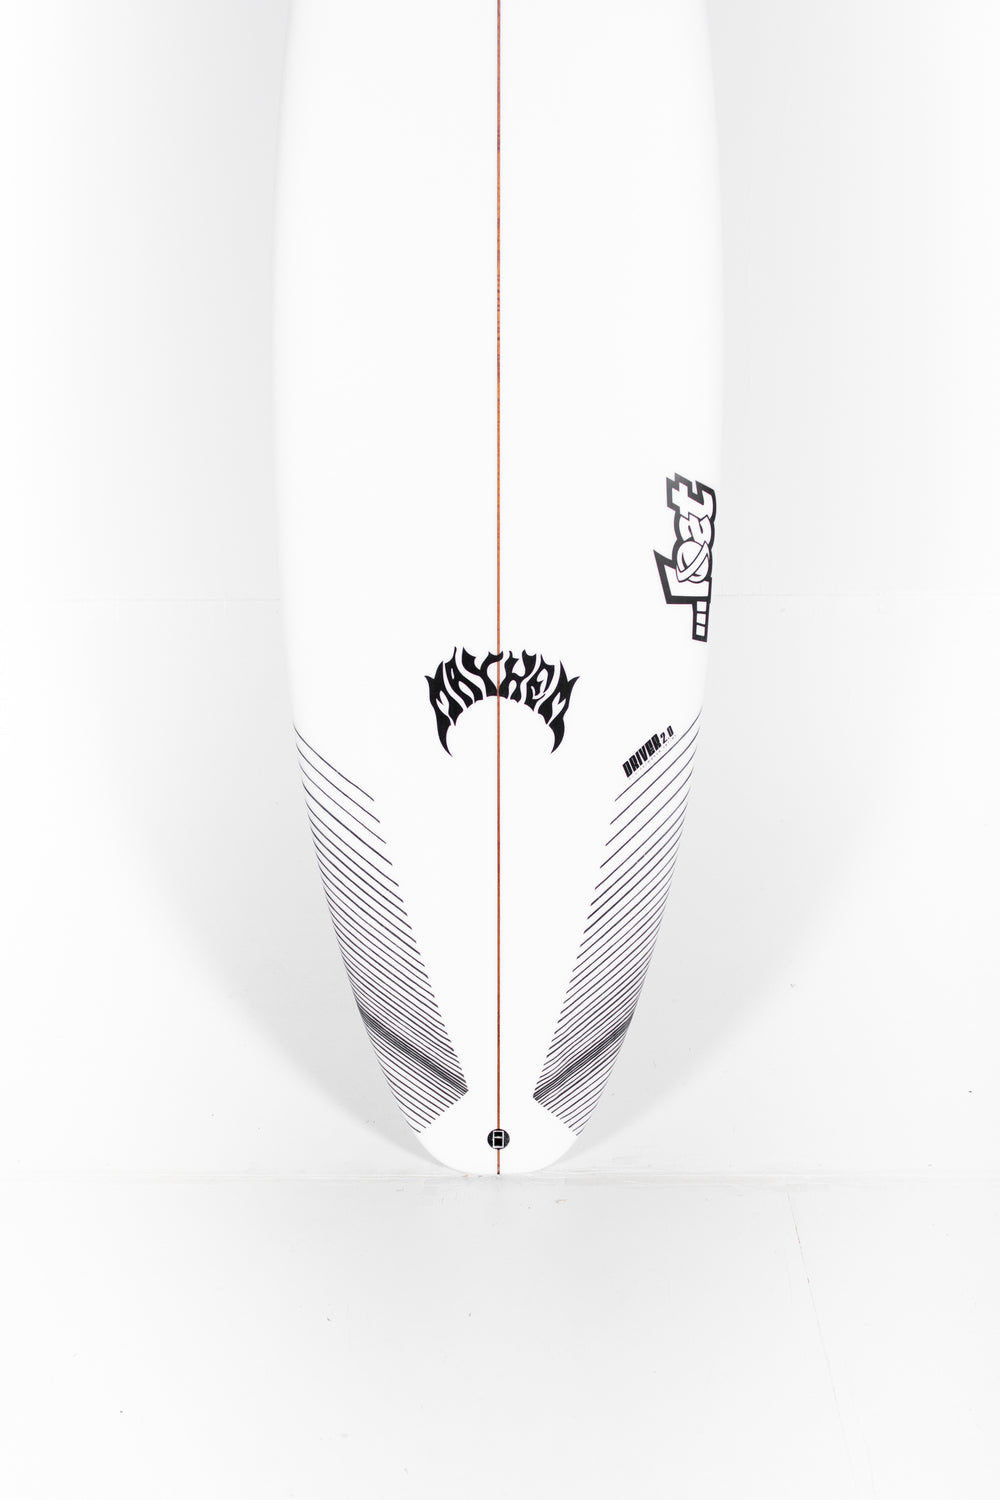 Lost Surfboards - SUB DRIVER 2.0 by Mayhem | Buy at PUKAS SURF SHOP